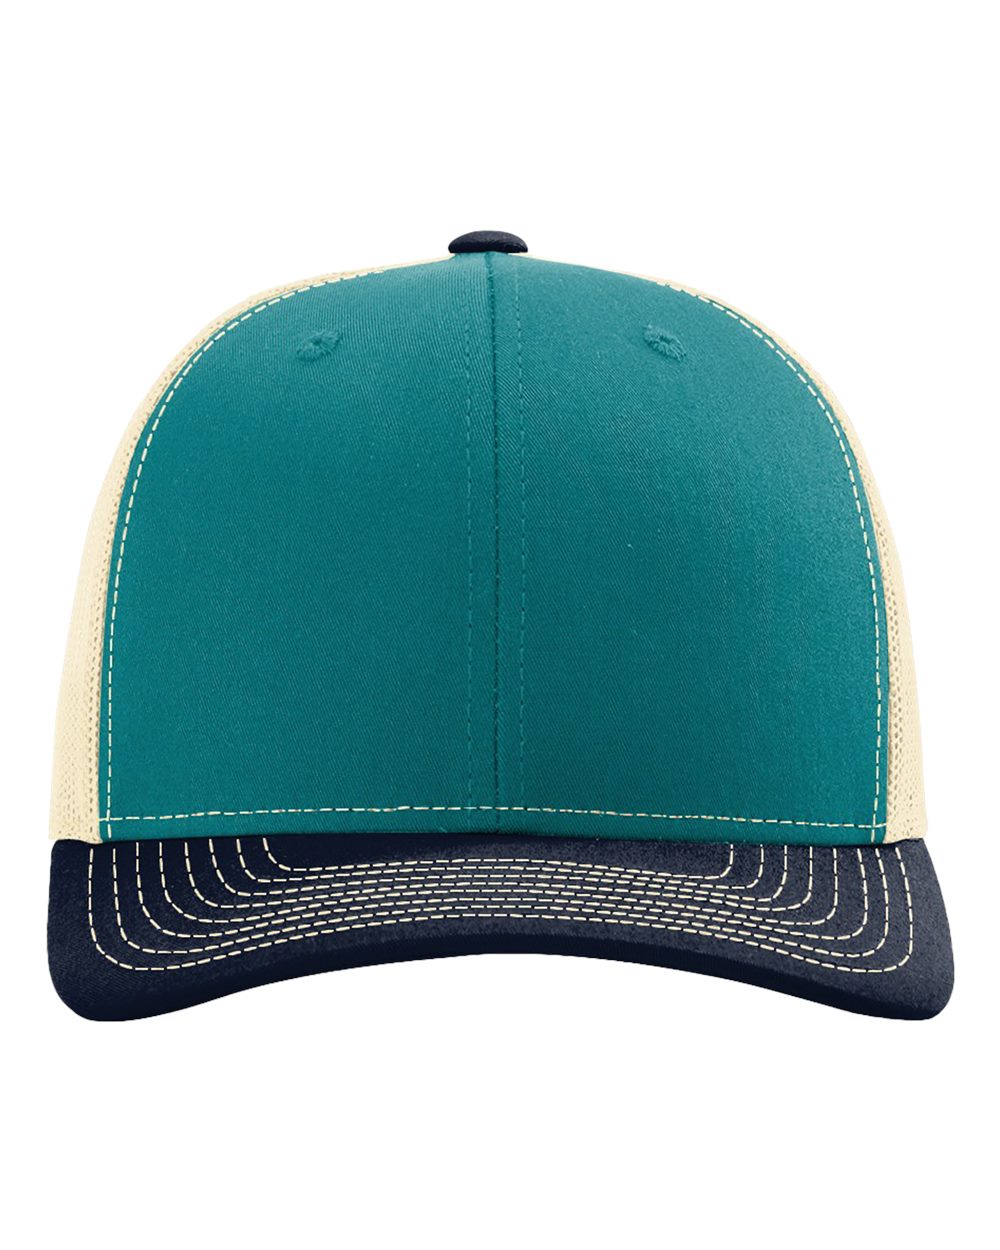 click to view Blue Teal/ Birch/ Navy